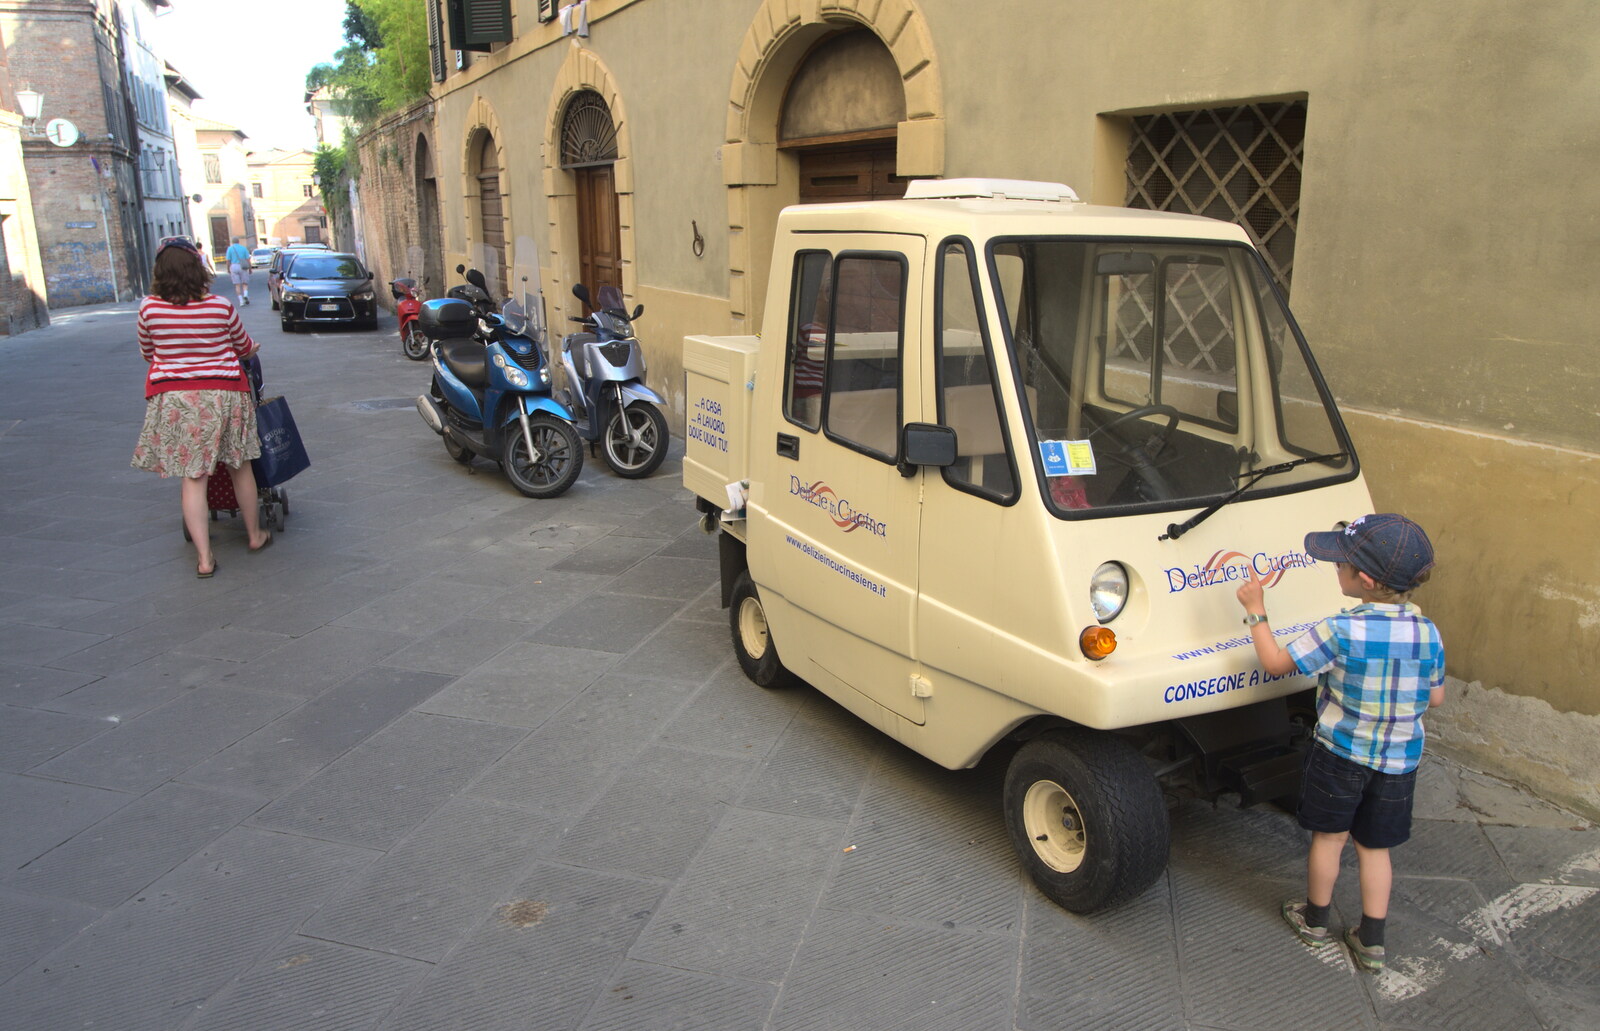 A Tuscan Winery and a Trip to Siena, Tuscany, Italy - 10th June 2013: Fred pokes a municipal buggy